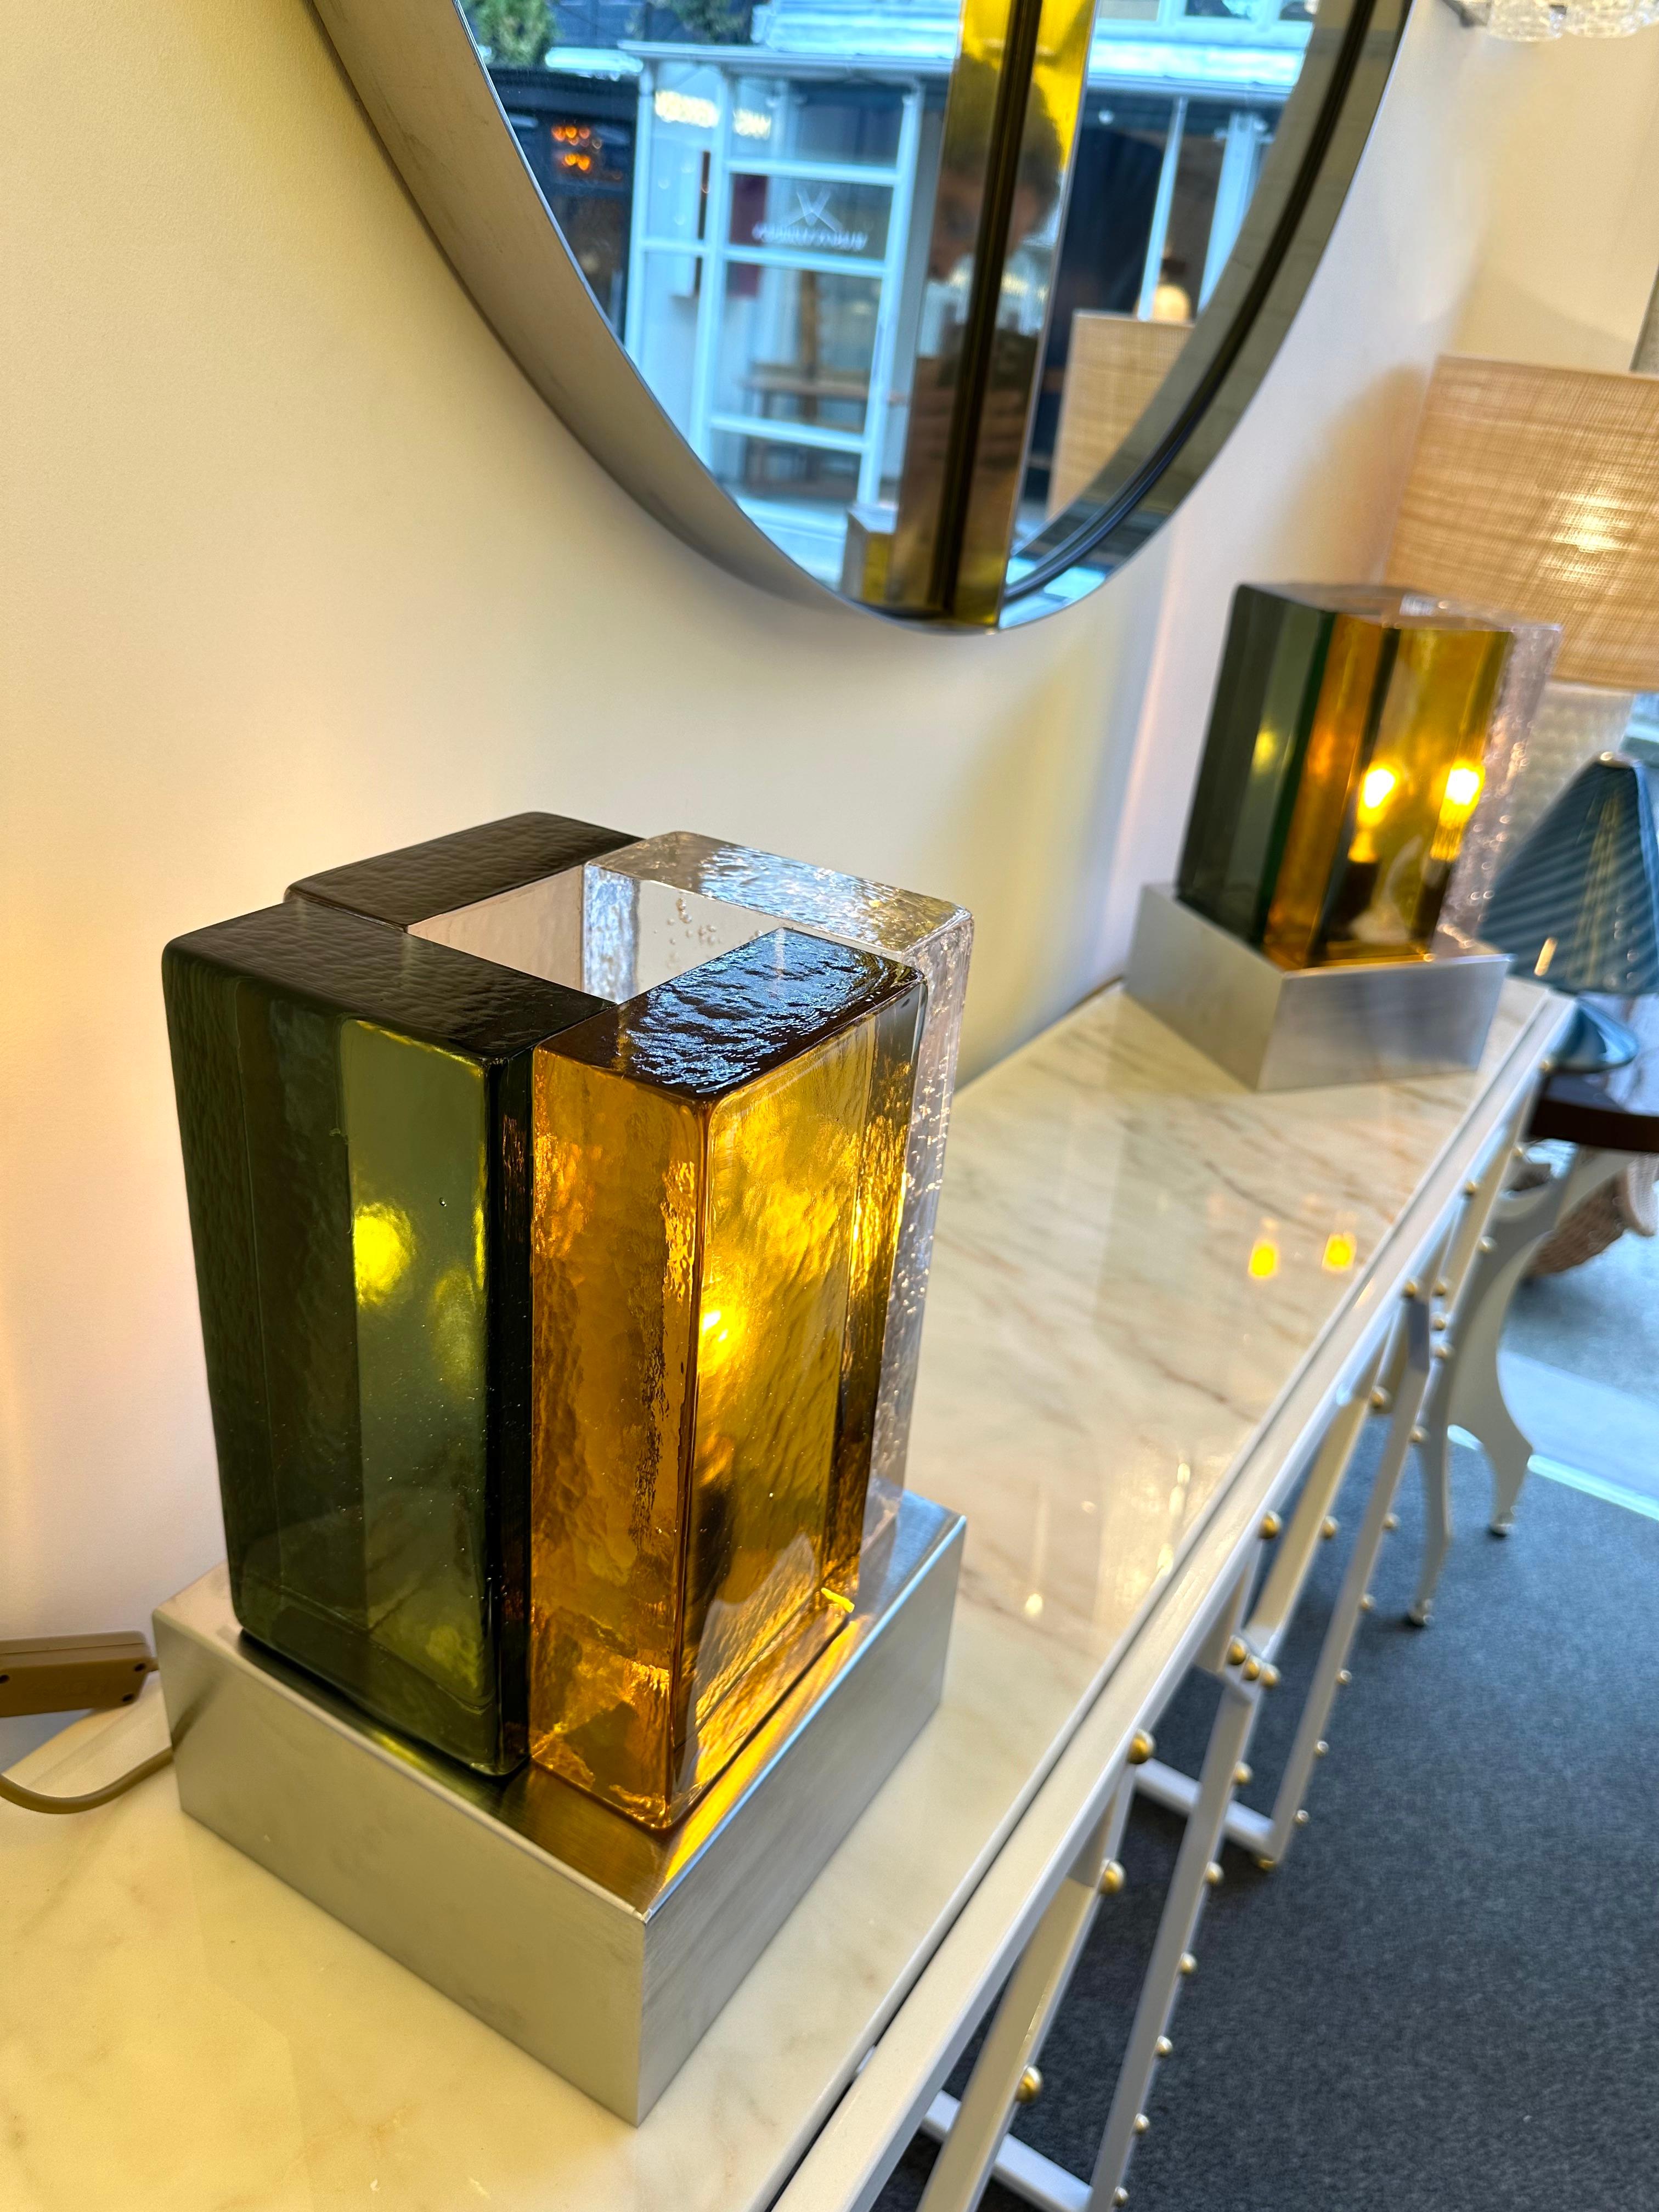 Pair of contemporary table or bedside lamps cubic pressed green amber and bubble clear Murano glass block and stainless steel base. Few exclusive artisanal italian design production workshop. In the Mid-Century Modern Space Age style of Mazzega,